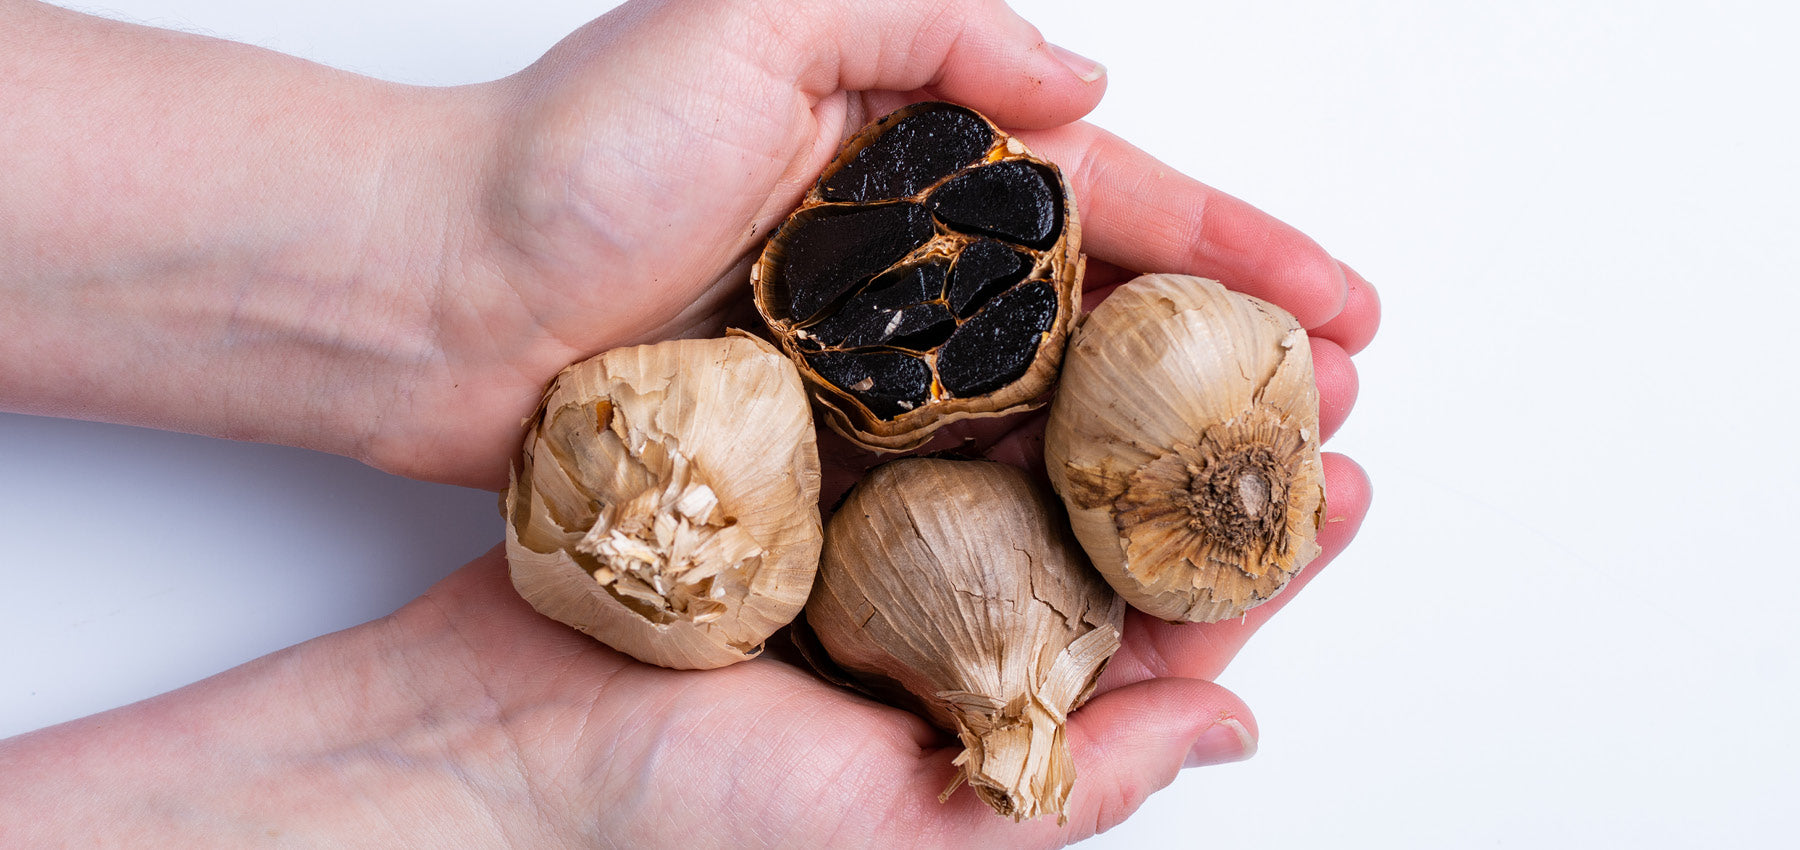 Four black garlic bulbs in someone's hands